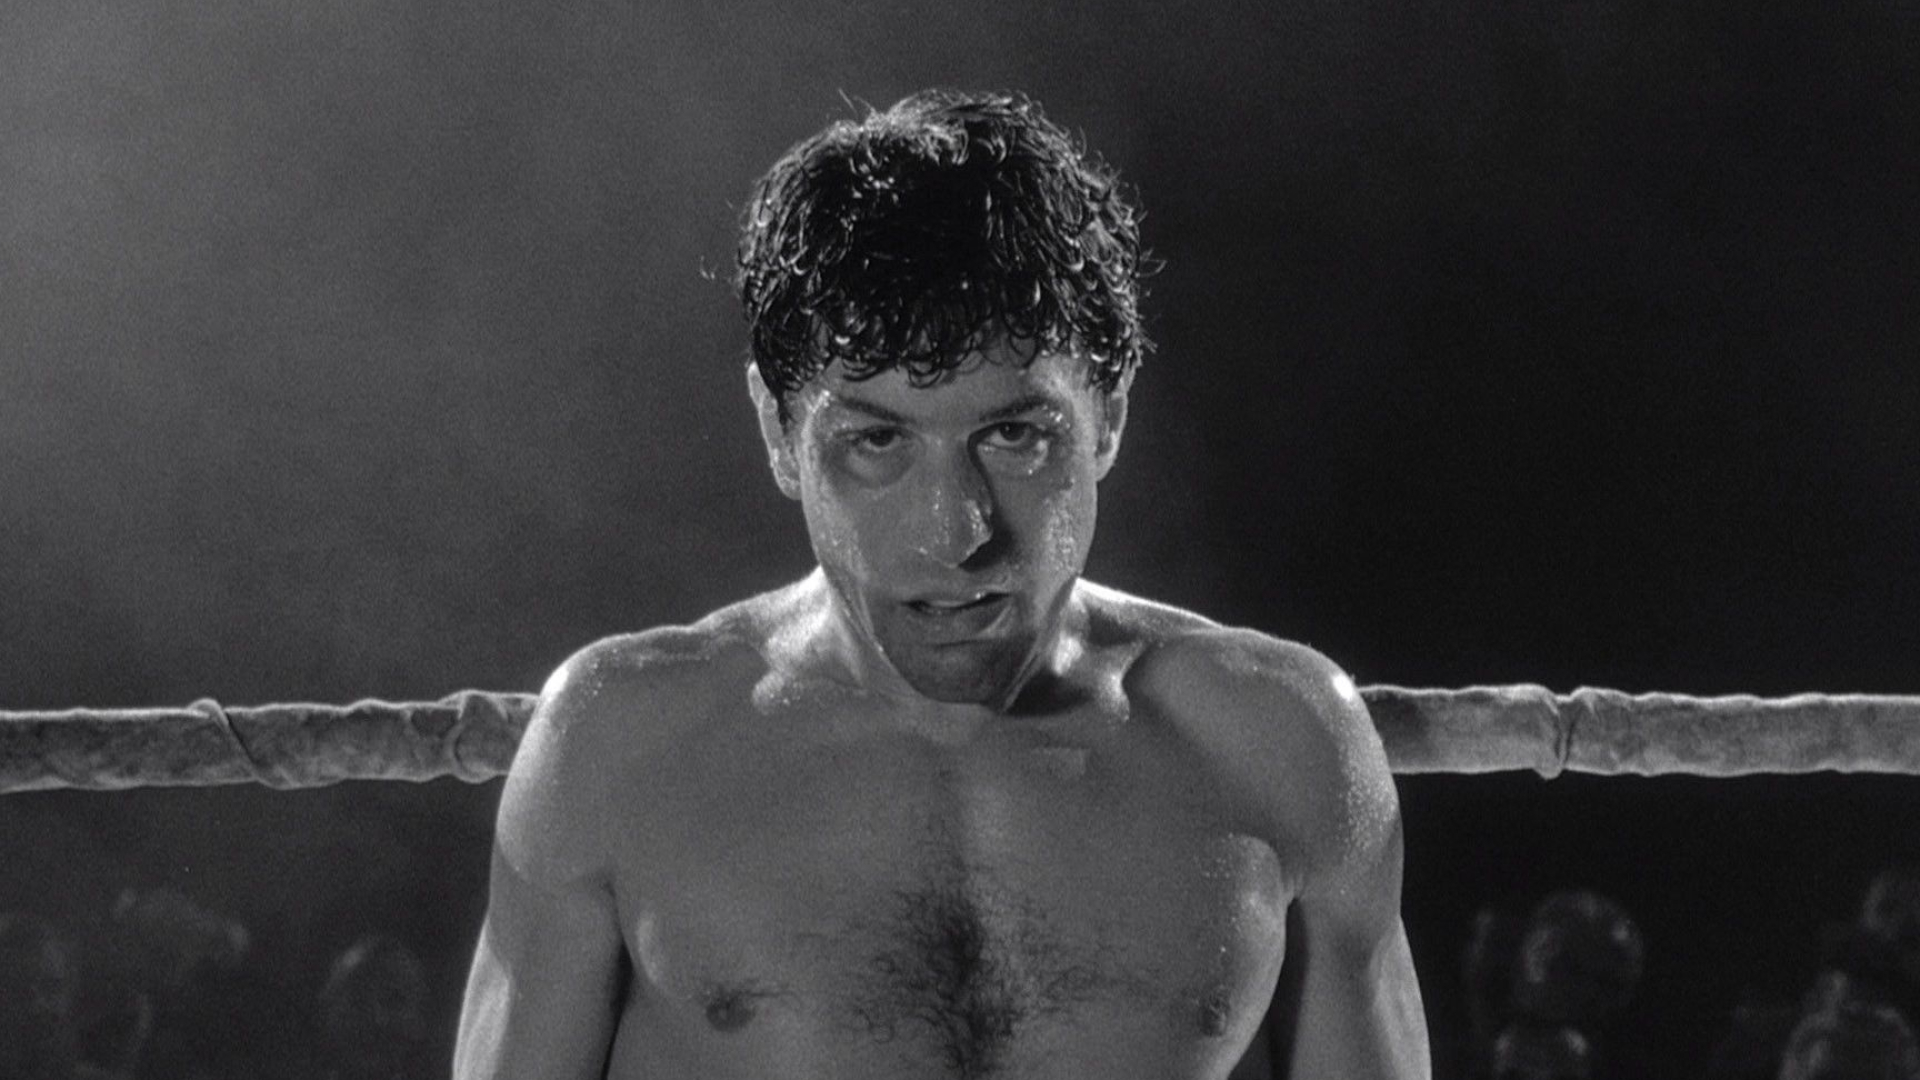 Raging Bull: The film was released in theaters on December 19, 1980. 1920x1080 Full HD Wallpaper.